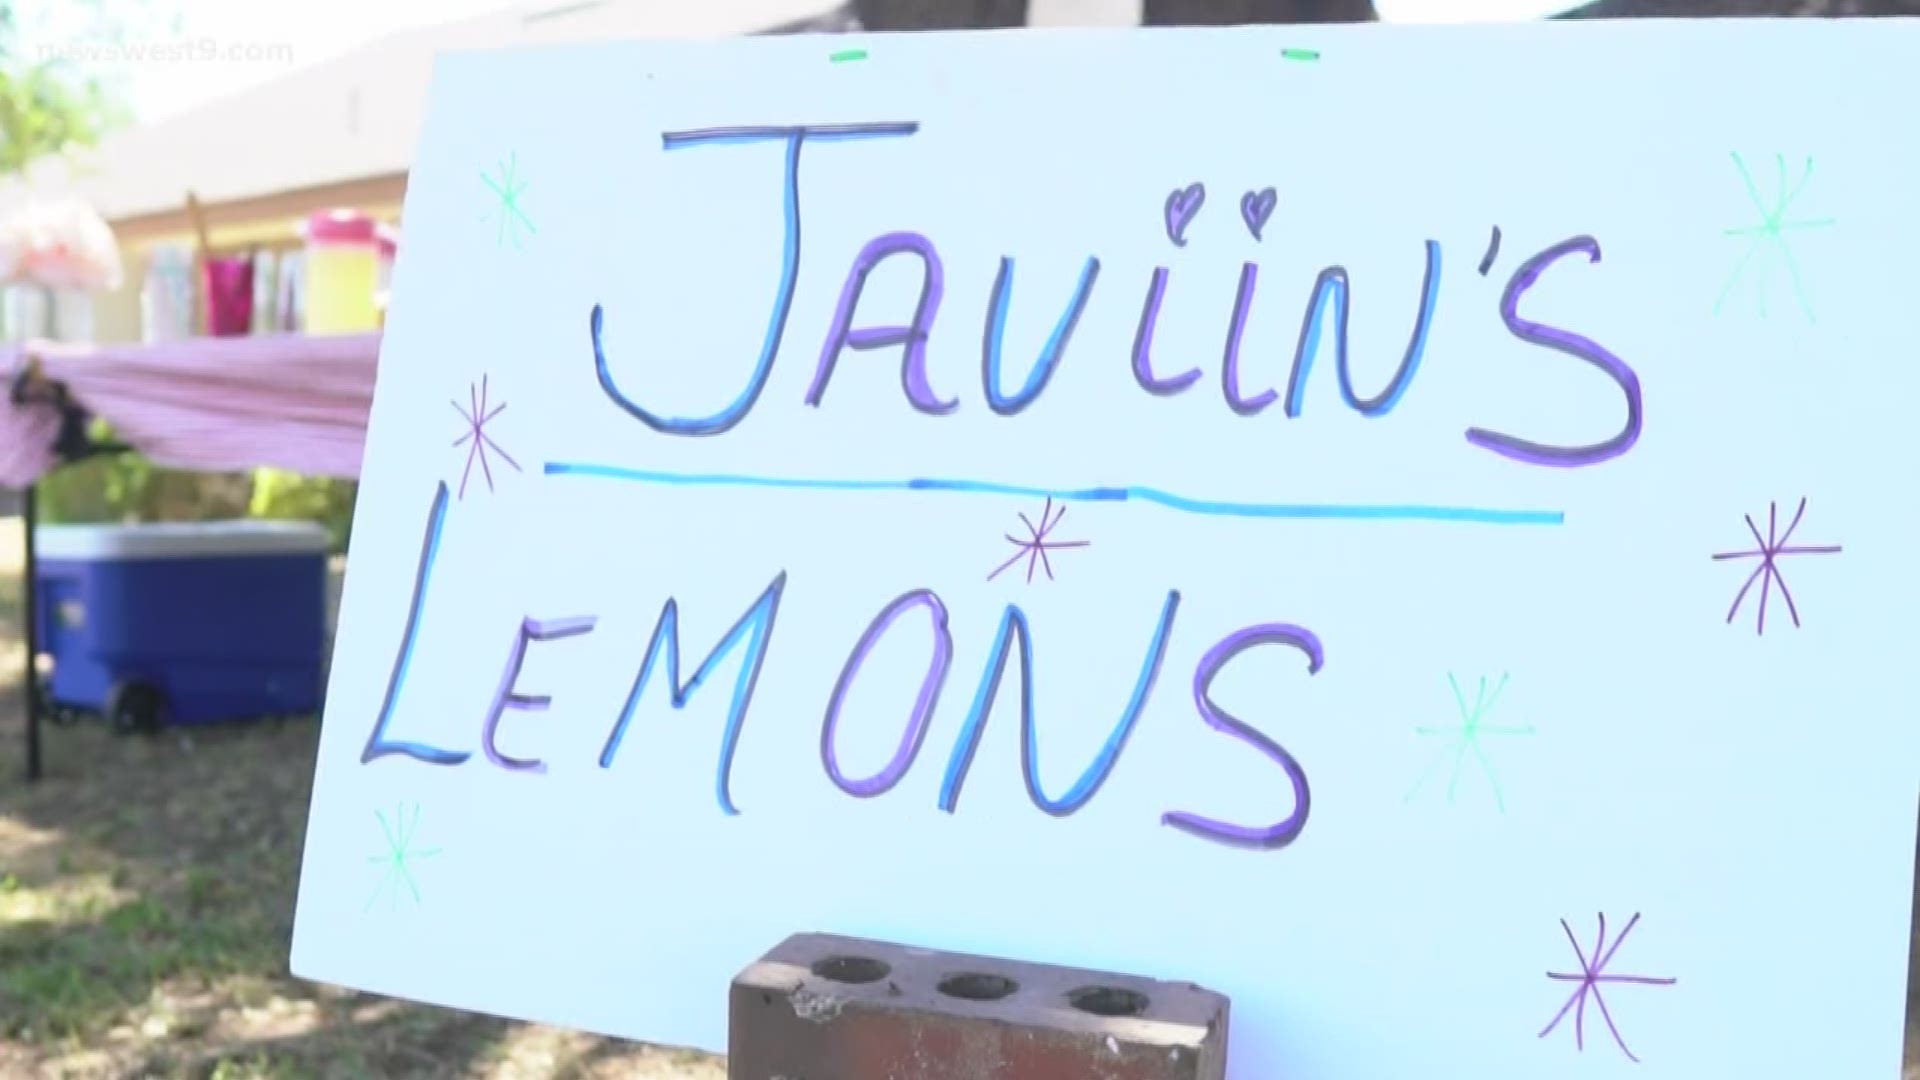 Javiin Mitchell has been pouring up lemonade for many thirsty residents in her community.